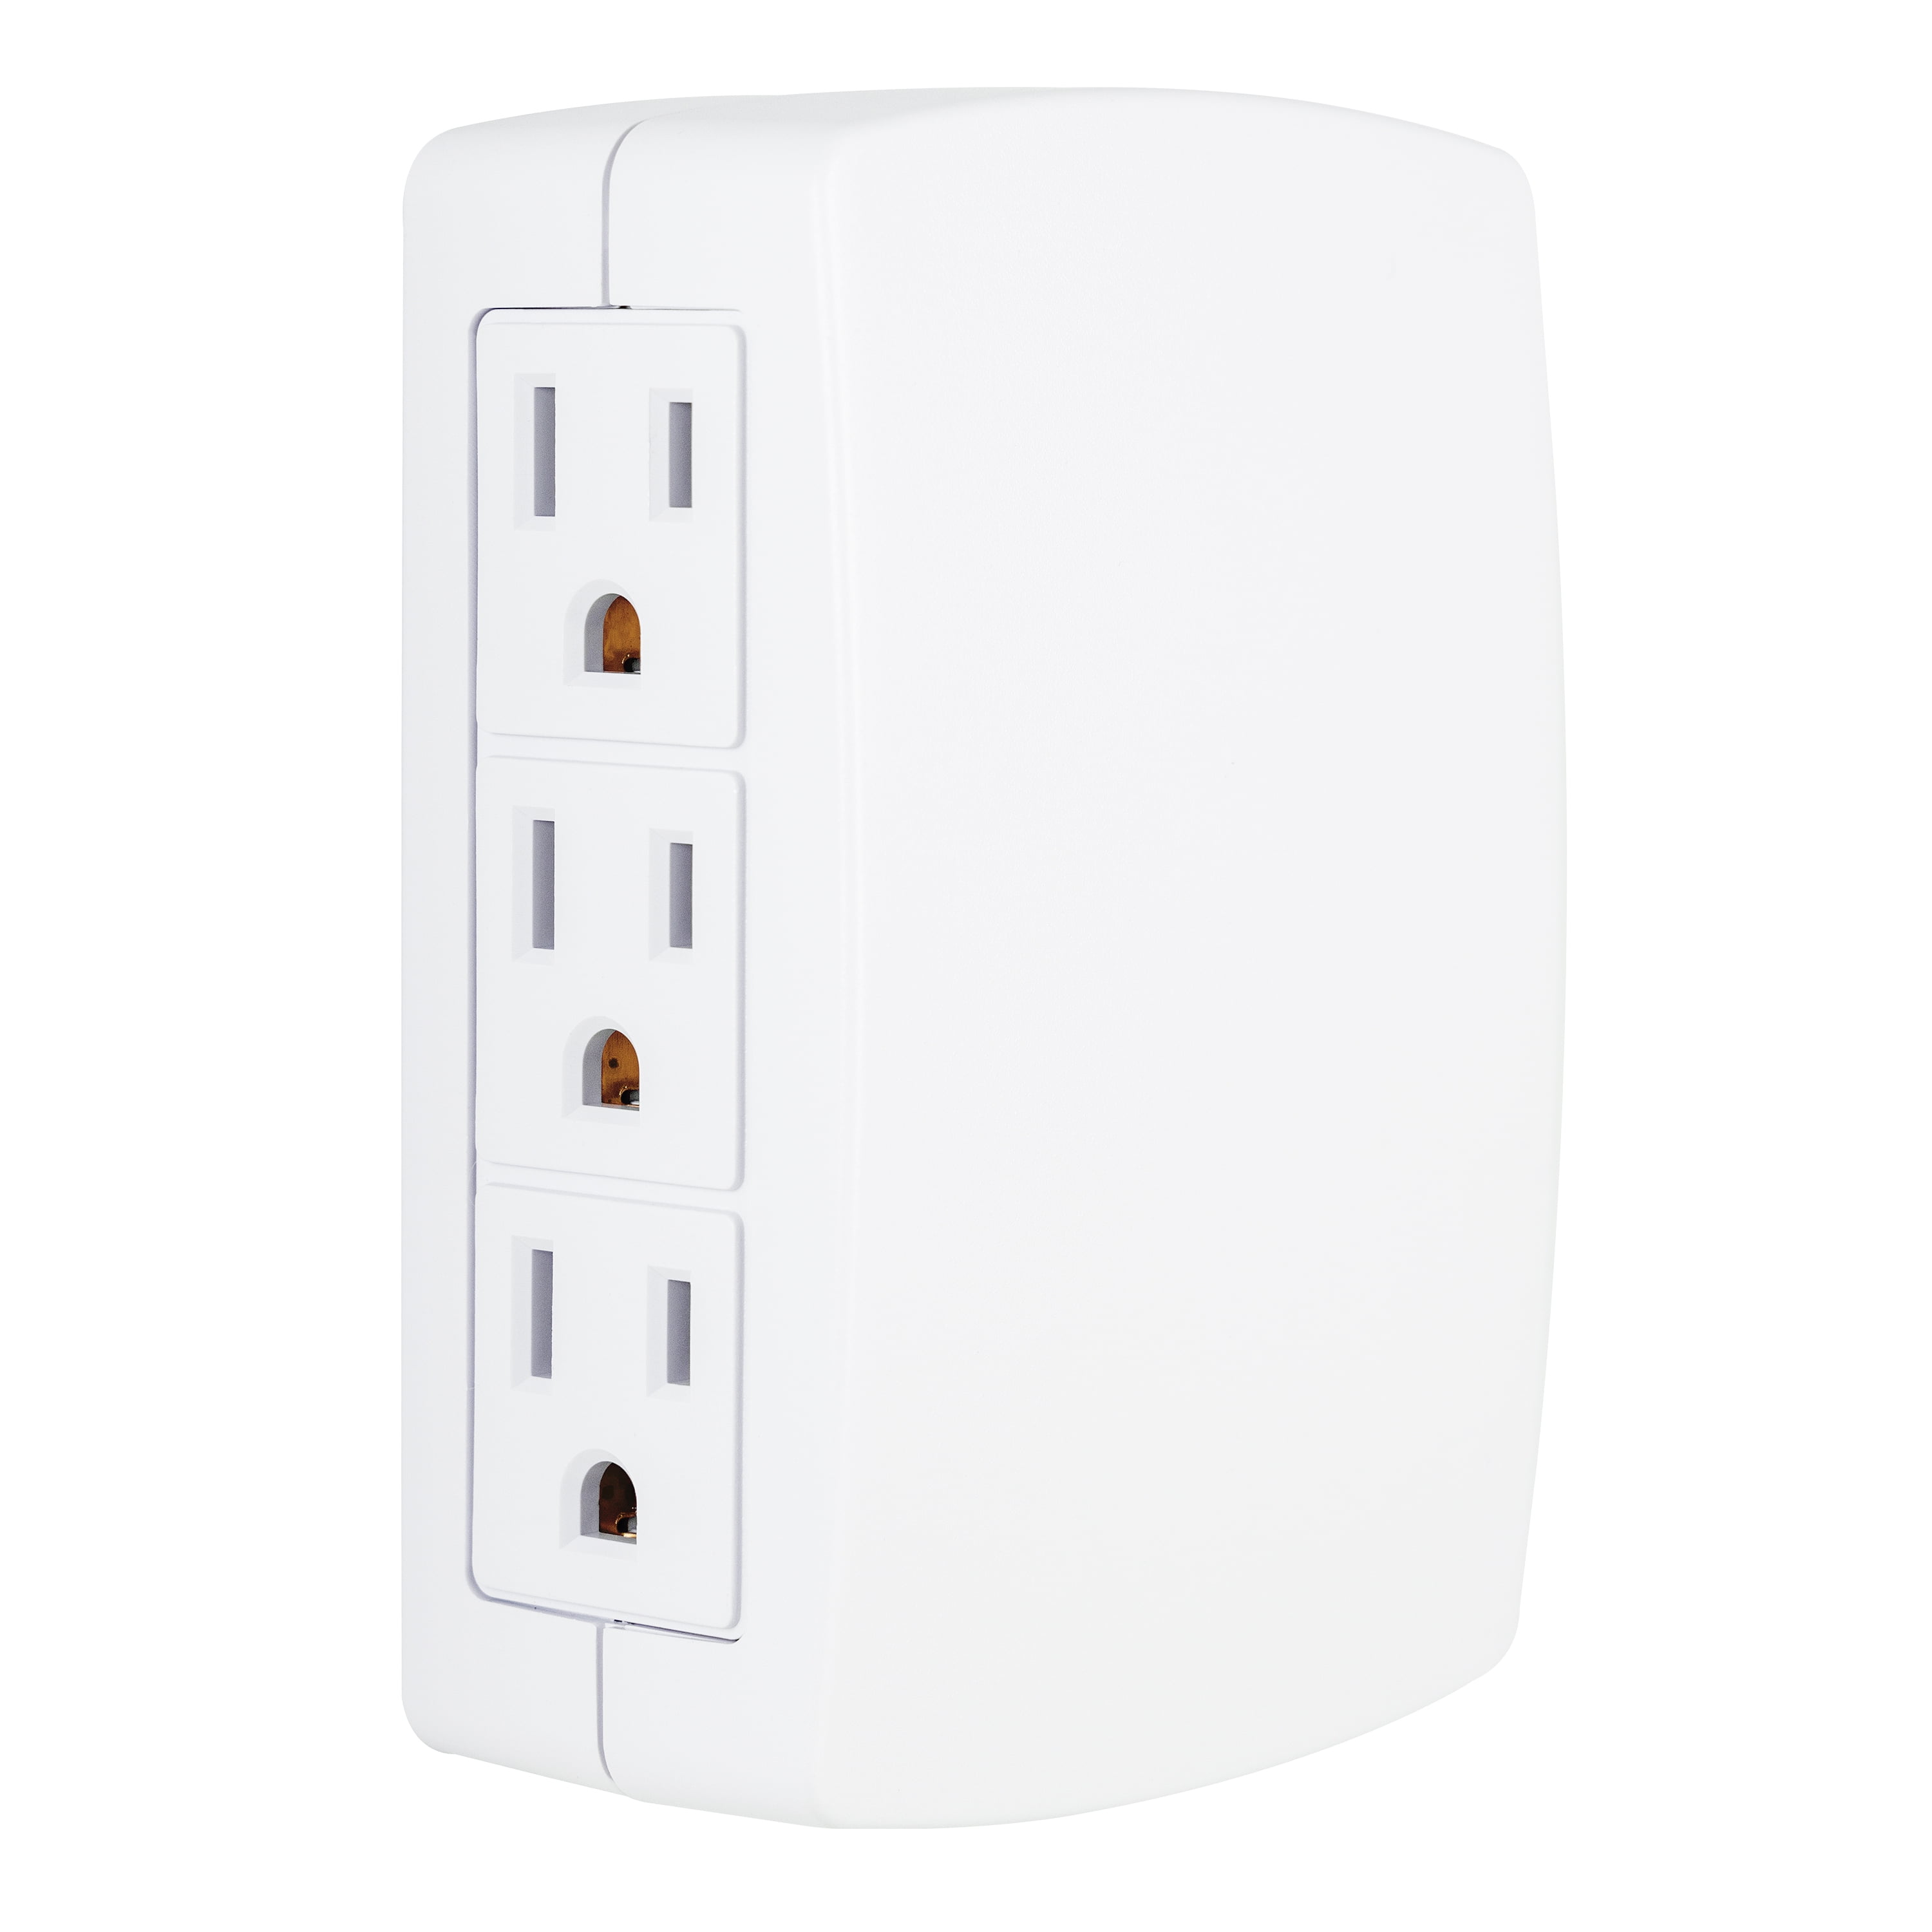 Philips Grounded 6-Outlet Wall Adapter Tap Side Access Outlets, Space-Saving Side-Access Design